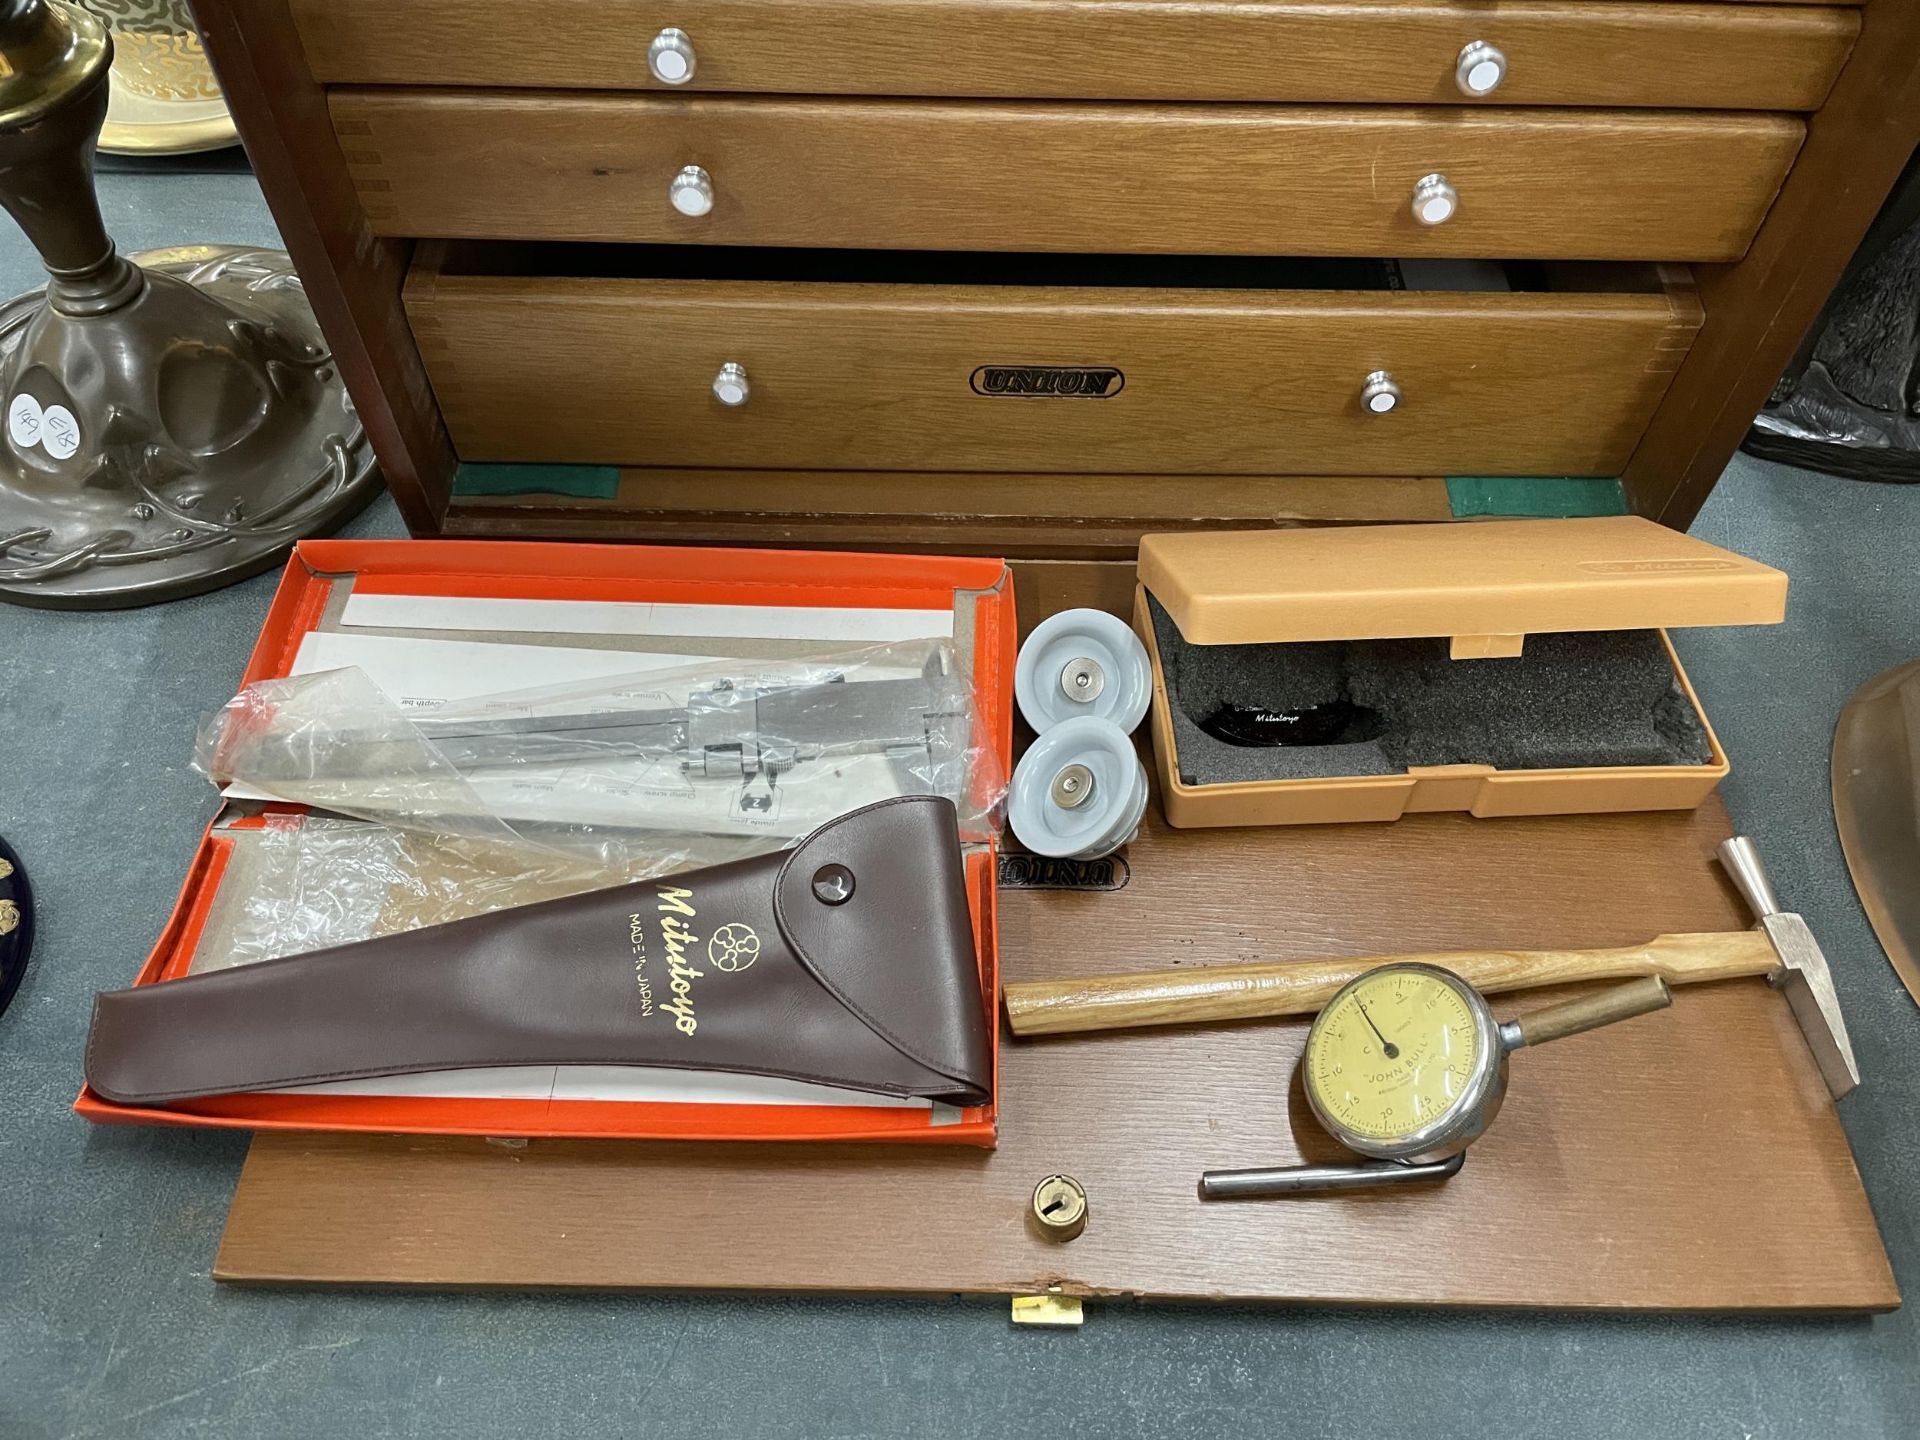 A UNION ENGINEERS CHEST WITH FIVE GRADUATED DRAWERS AND TOOLS TO INCLUDE GAUGES, CALIPERS, HAMMER - Image 3 of 6